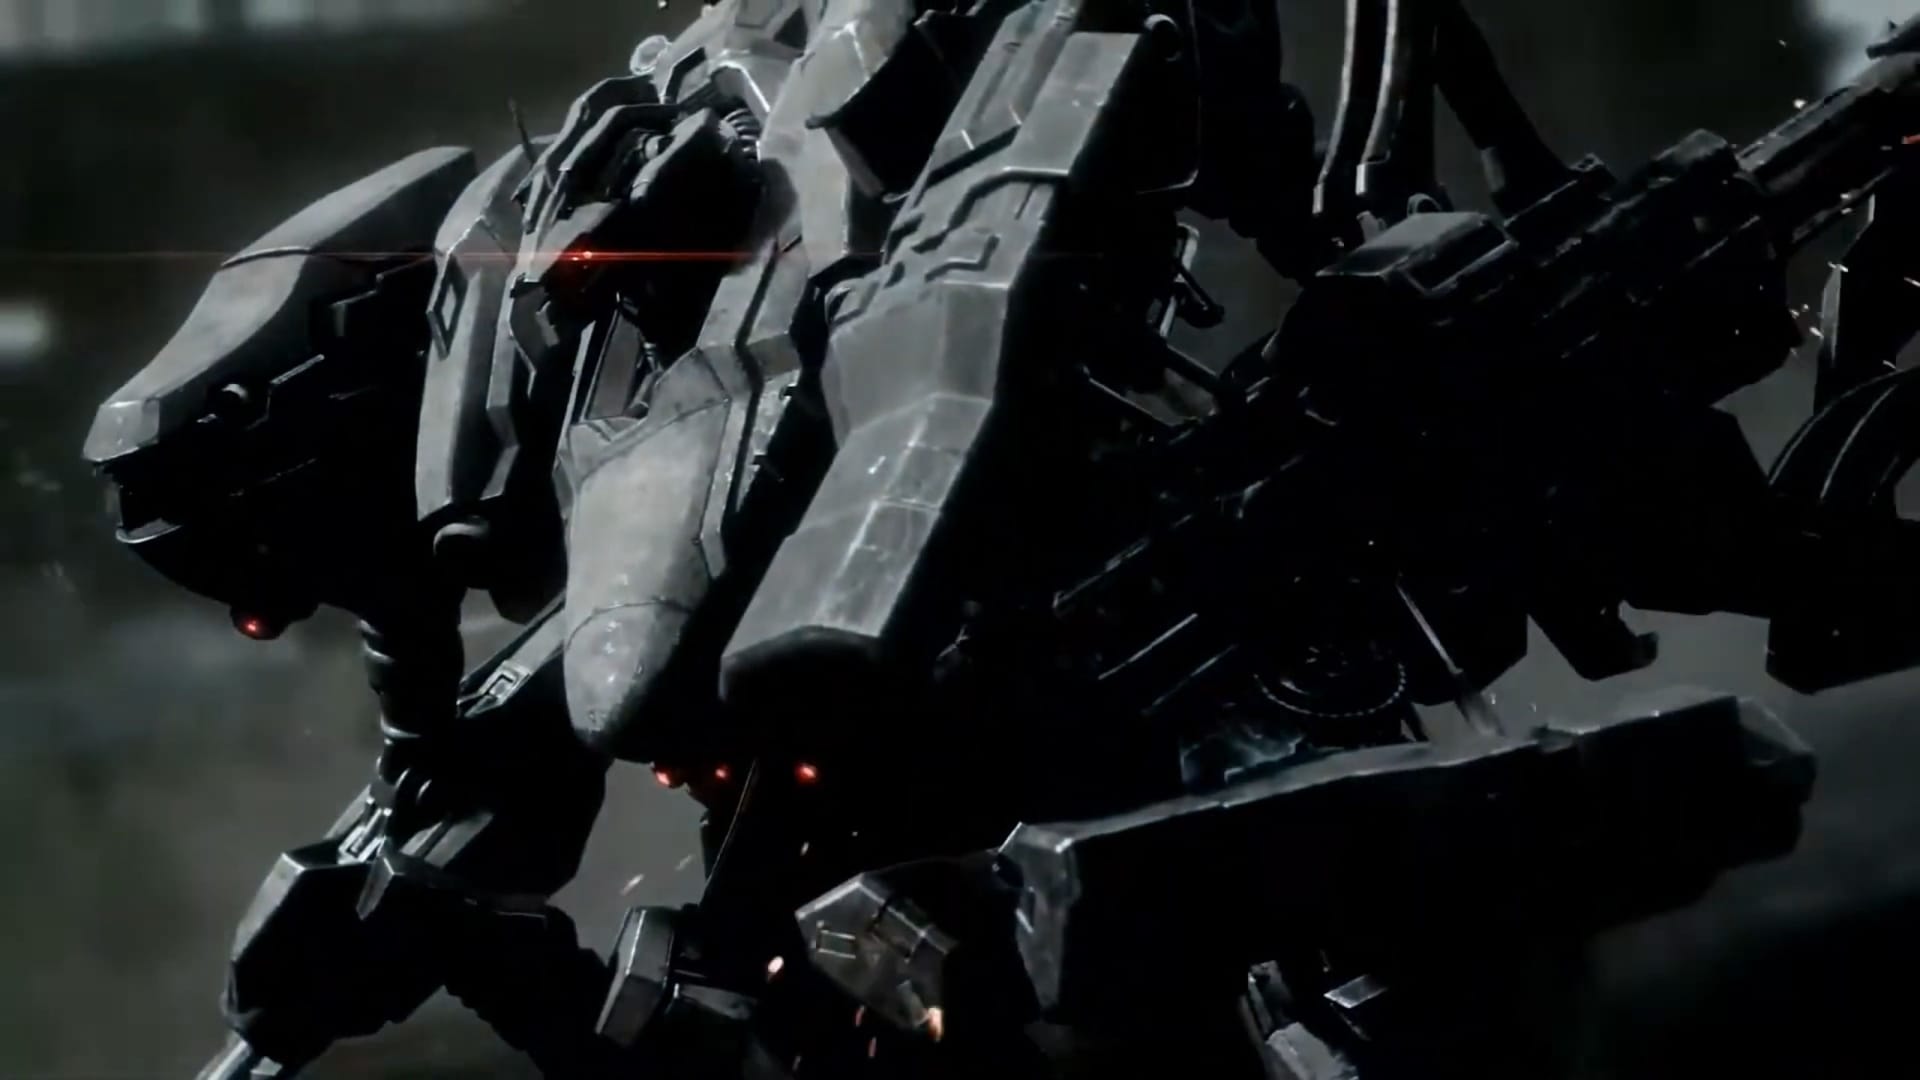 What To Expect From Armored Core VI, Elden Ring Devs' New Game